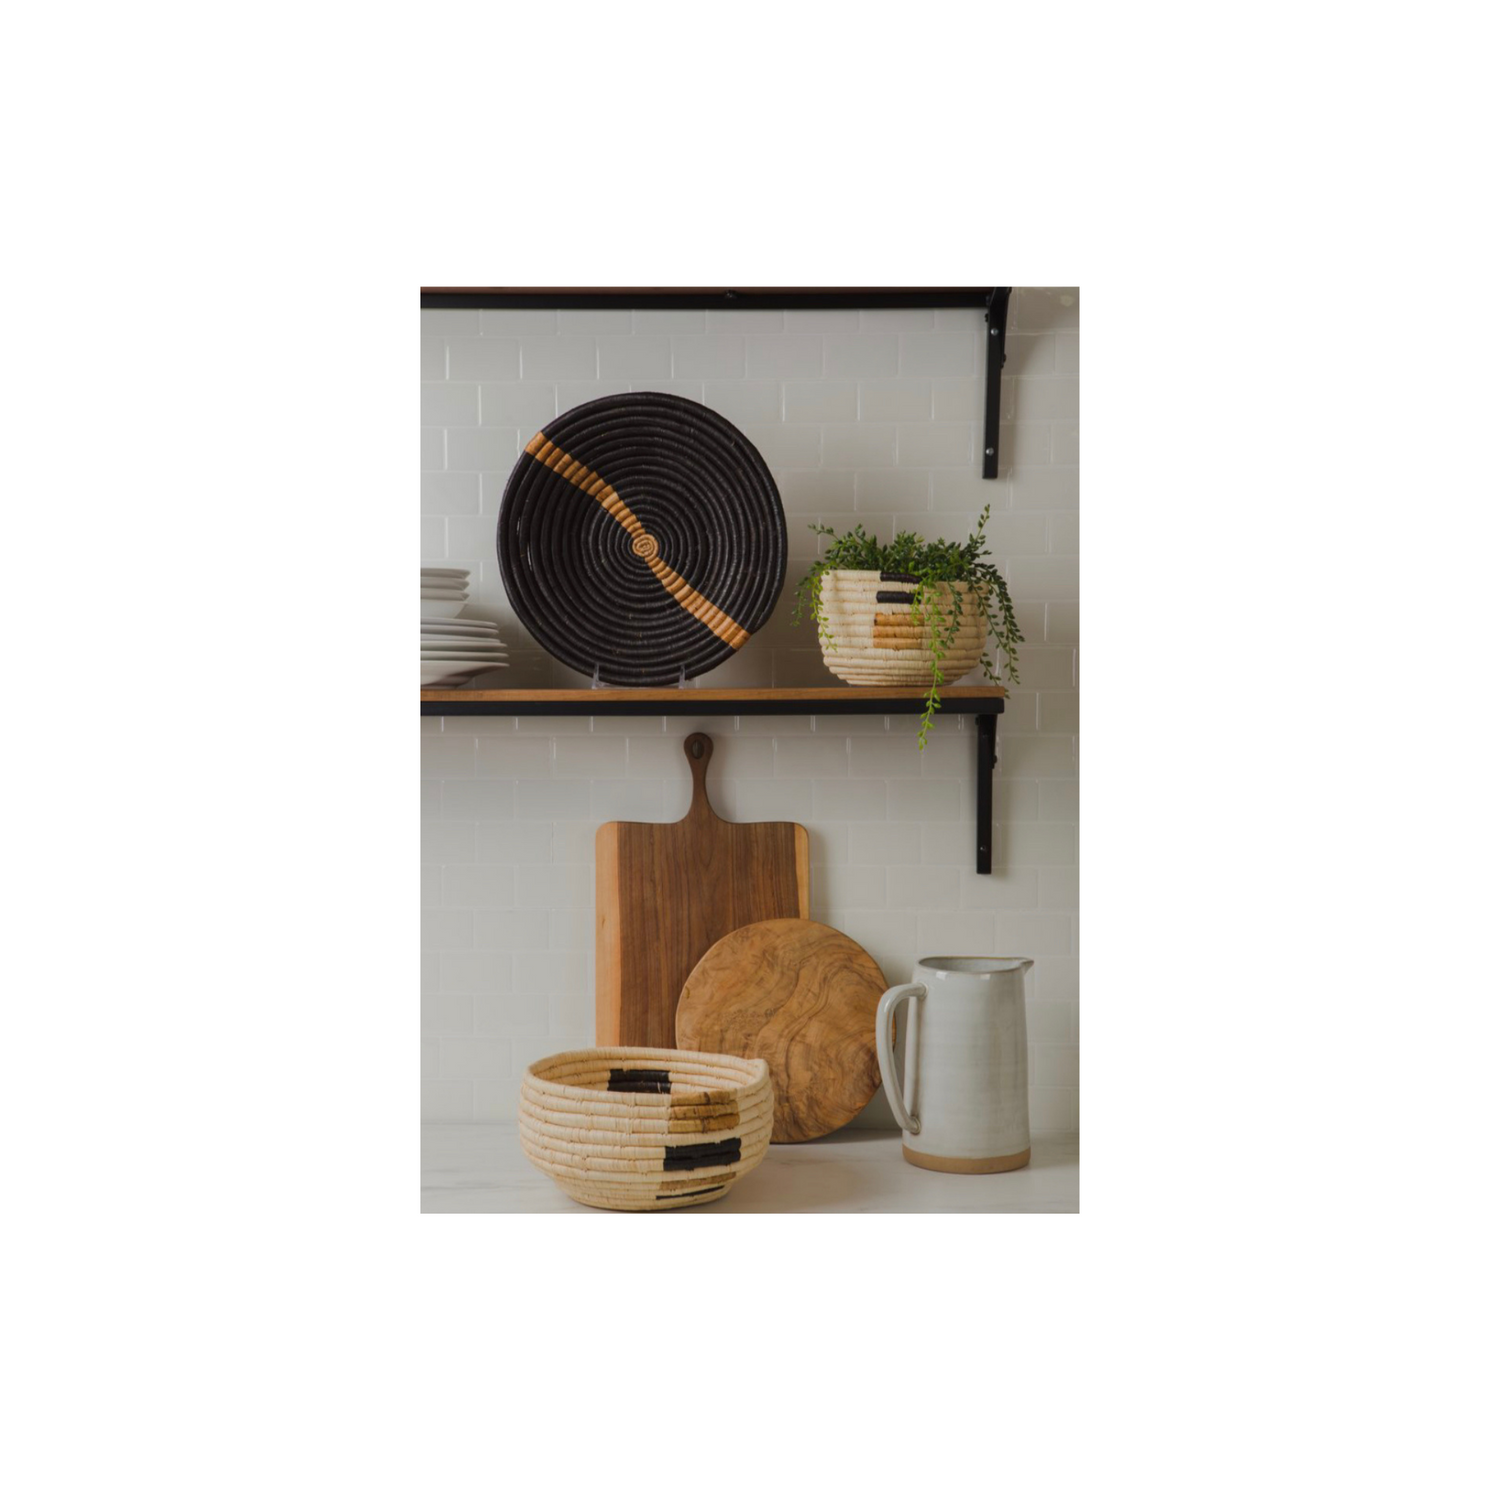 Shelves with woven baskets, bread boards against a white tile wall, ceramic pitcher and plant inside kazi woven basket